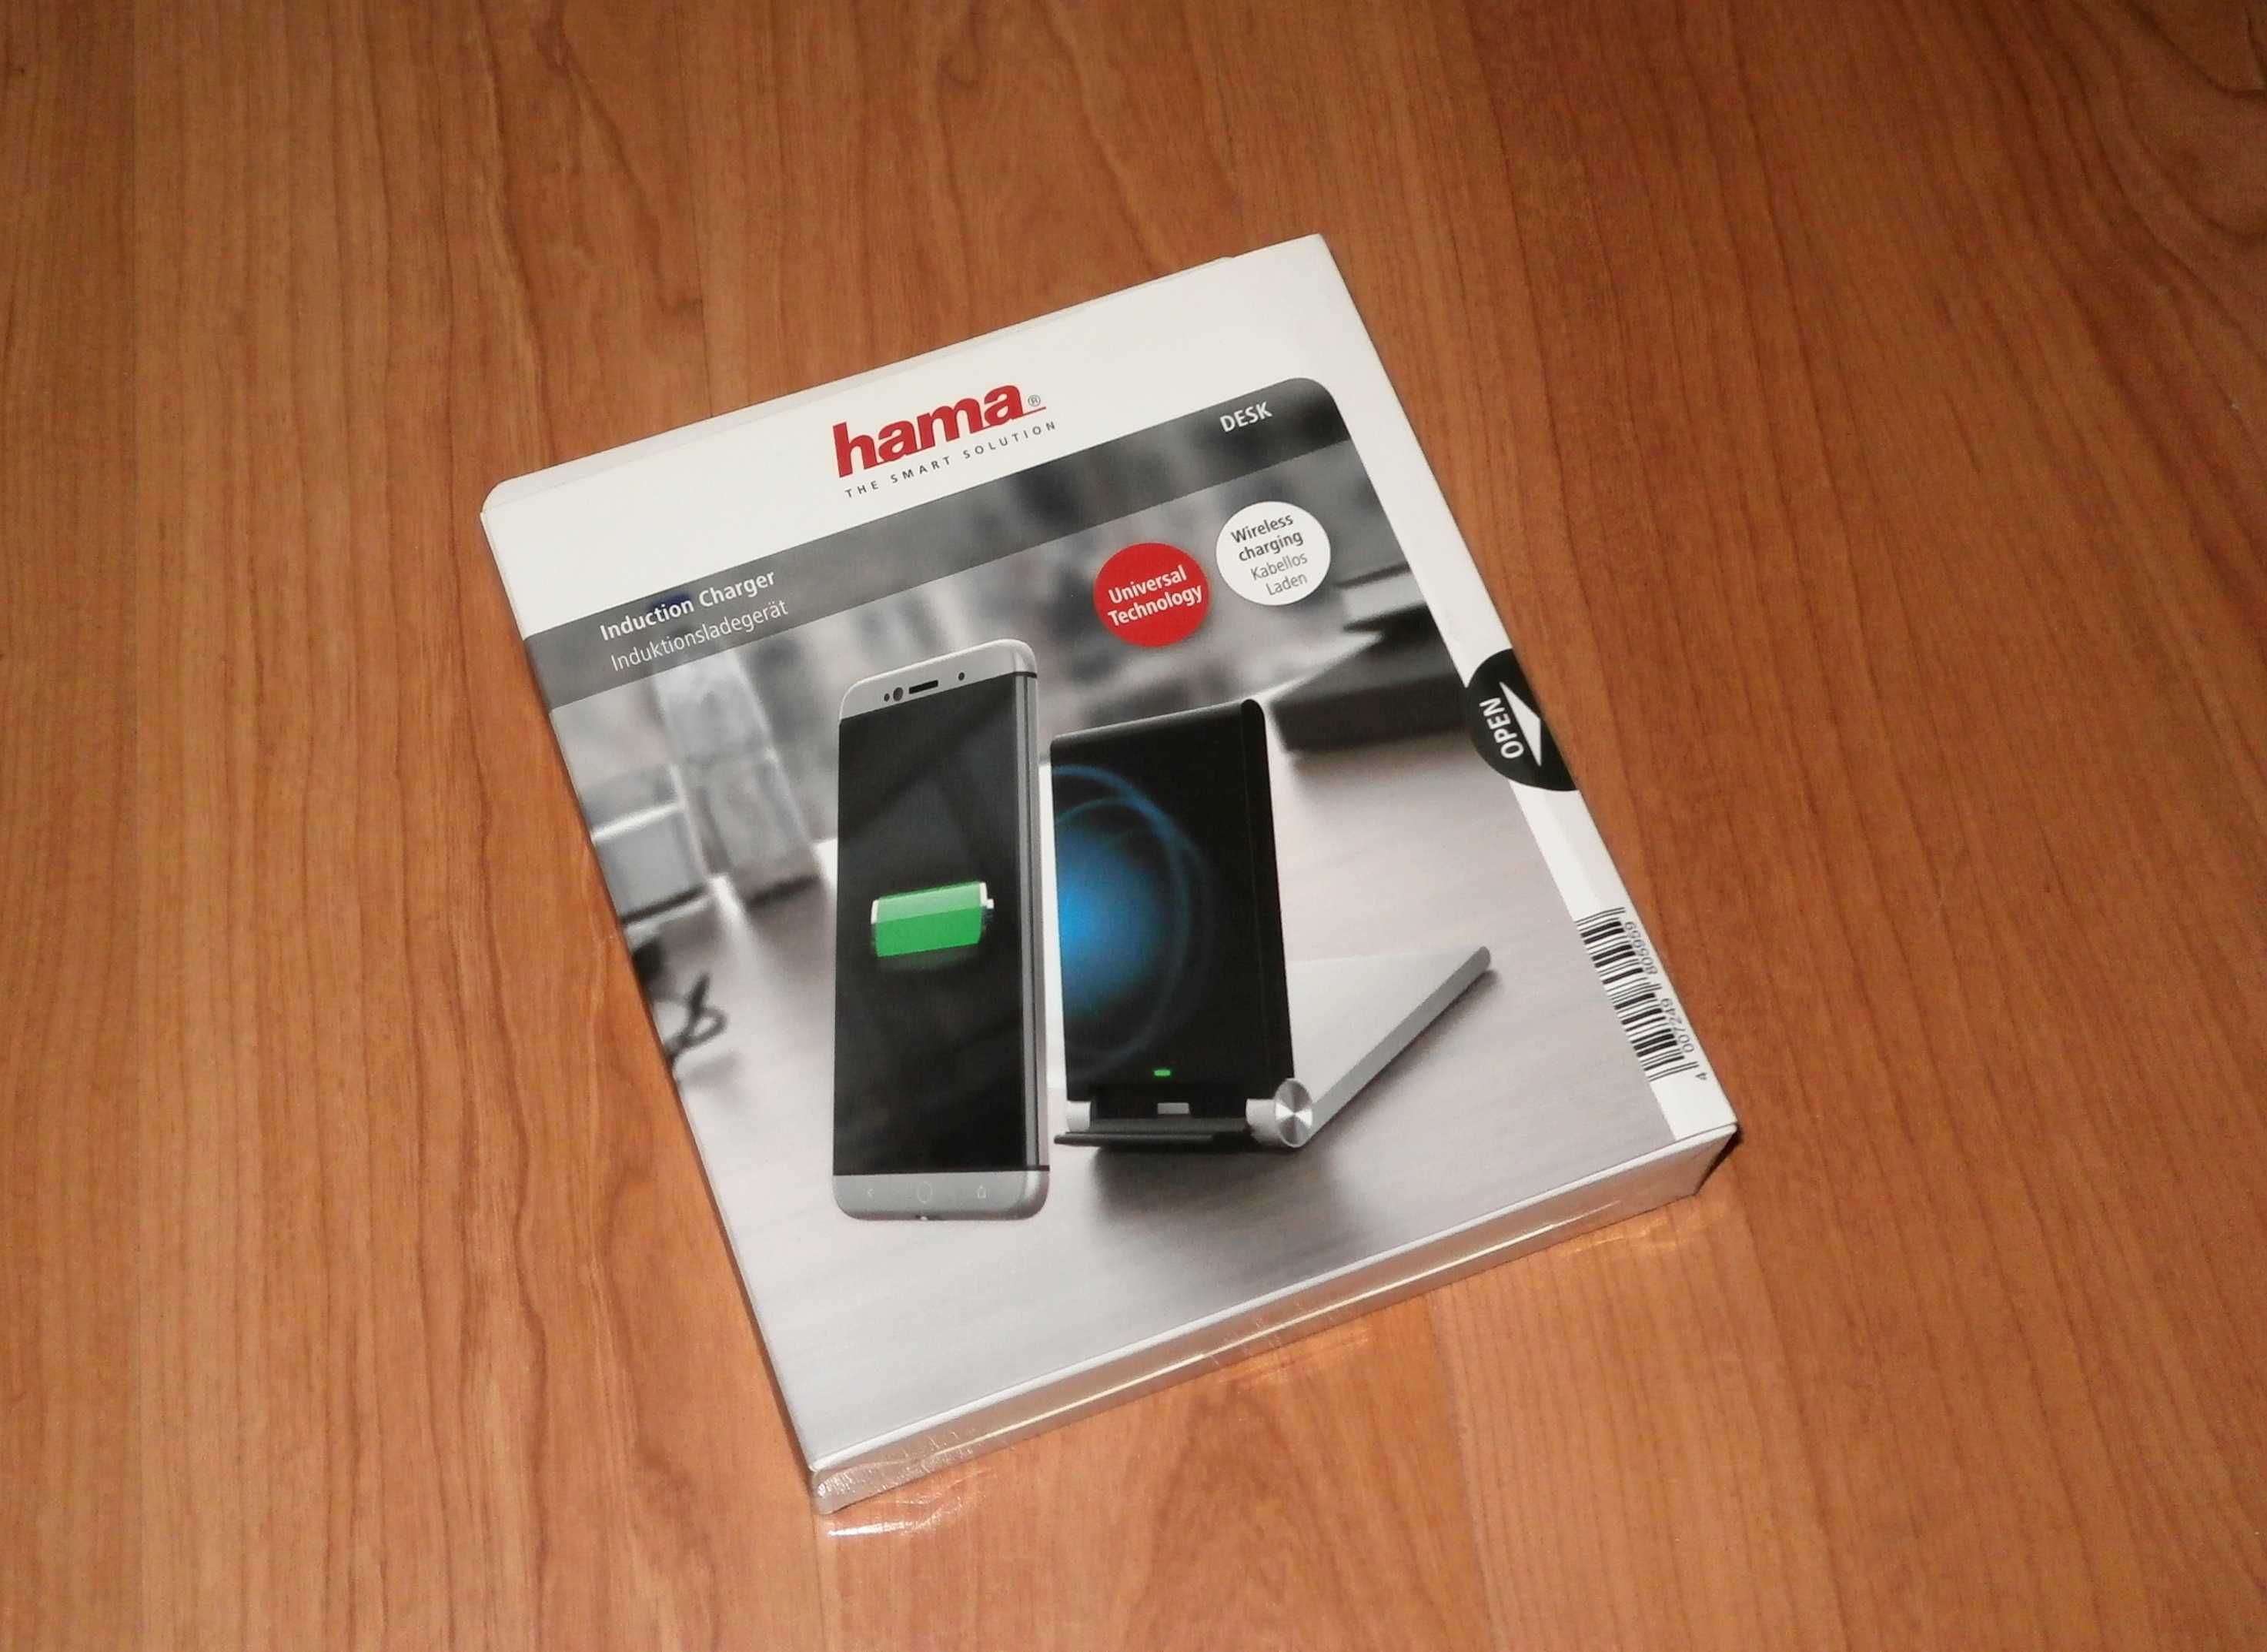 Incarcator wireless Qi HAMA Desk Inductive Charger, in cutie